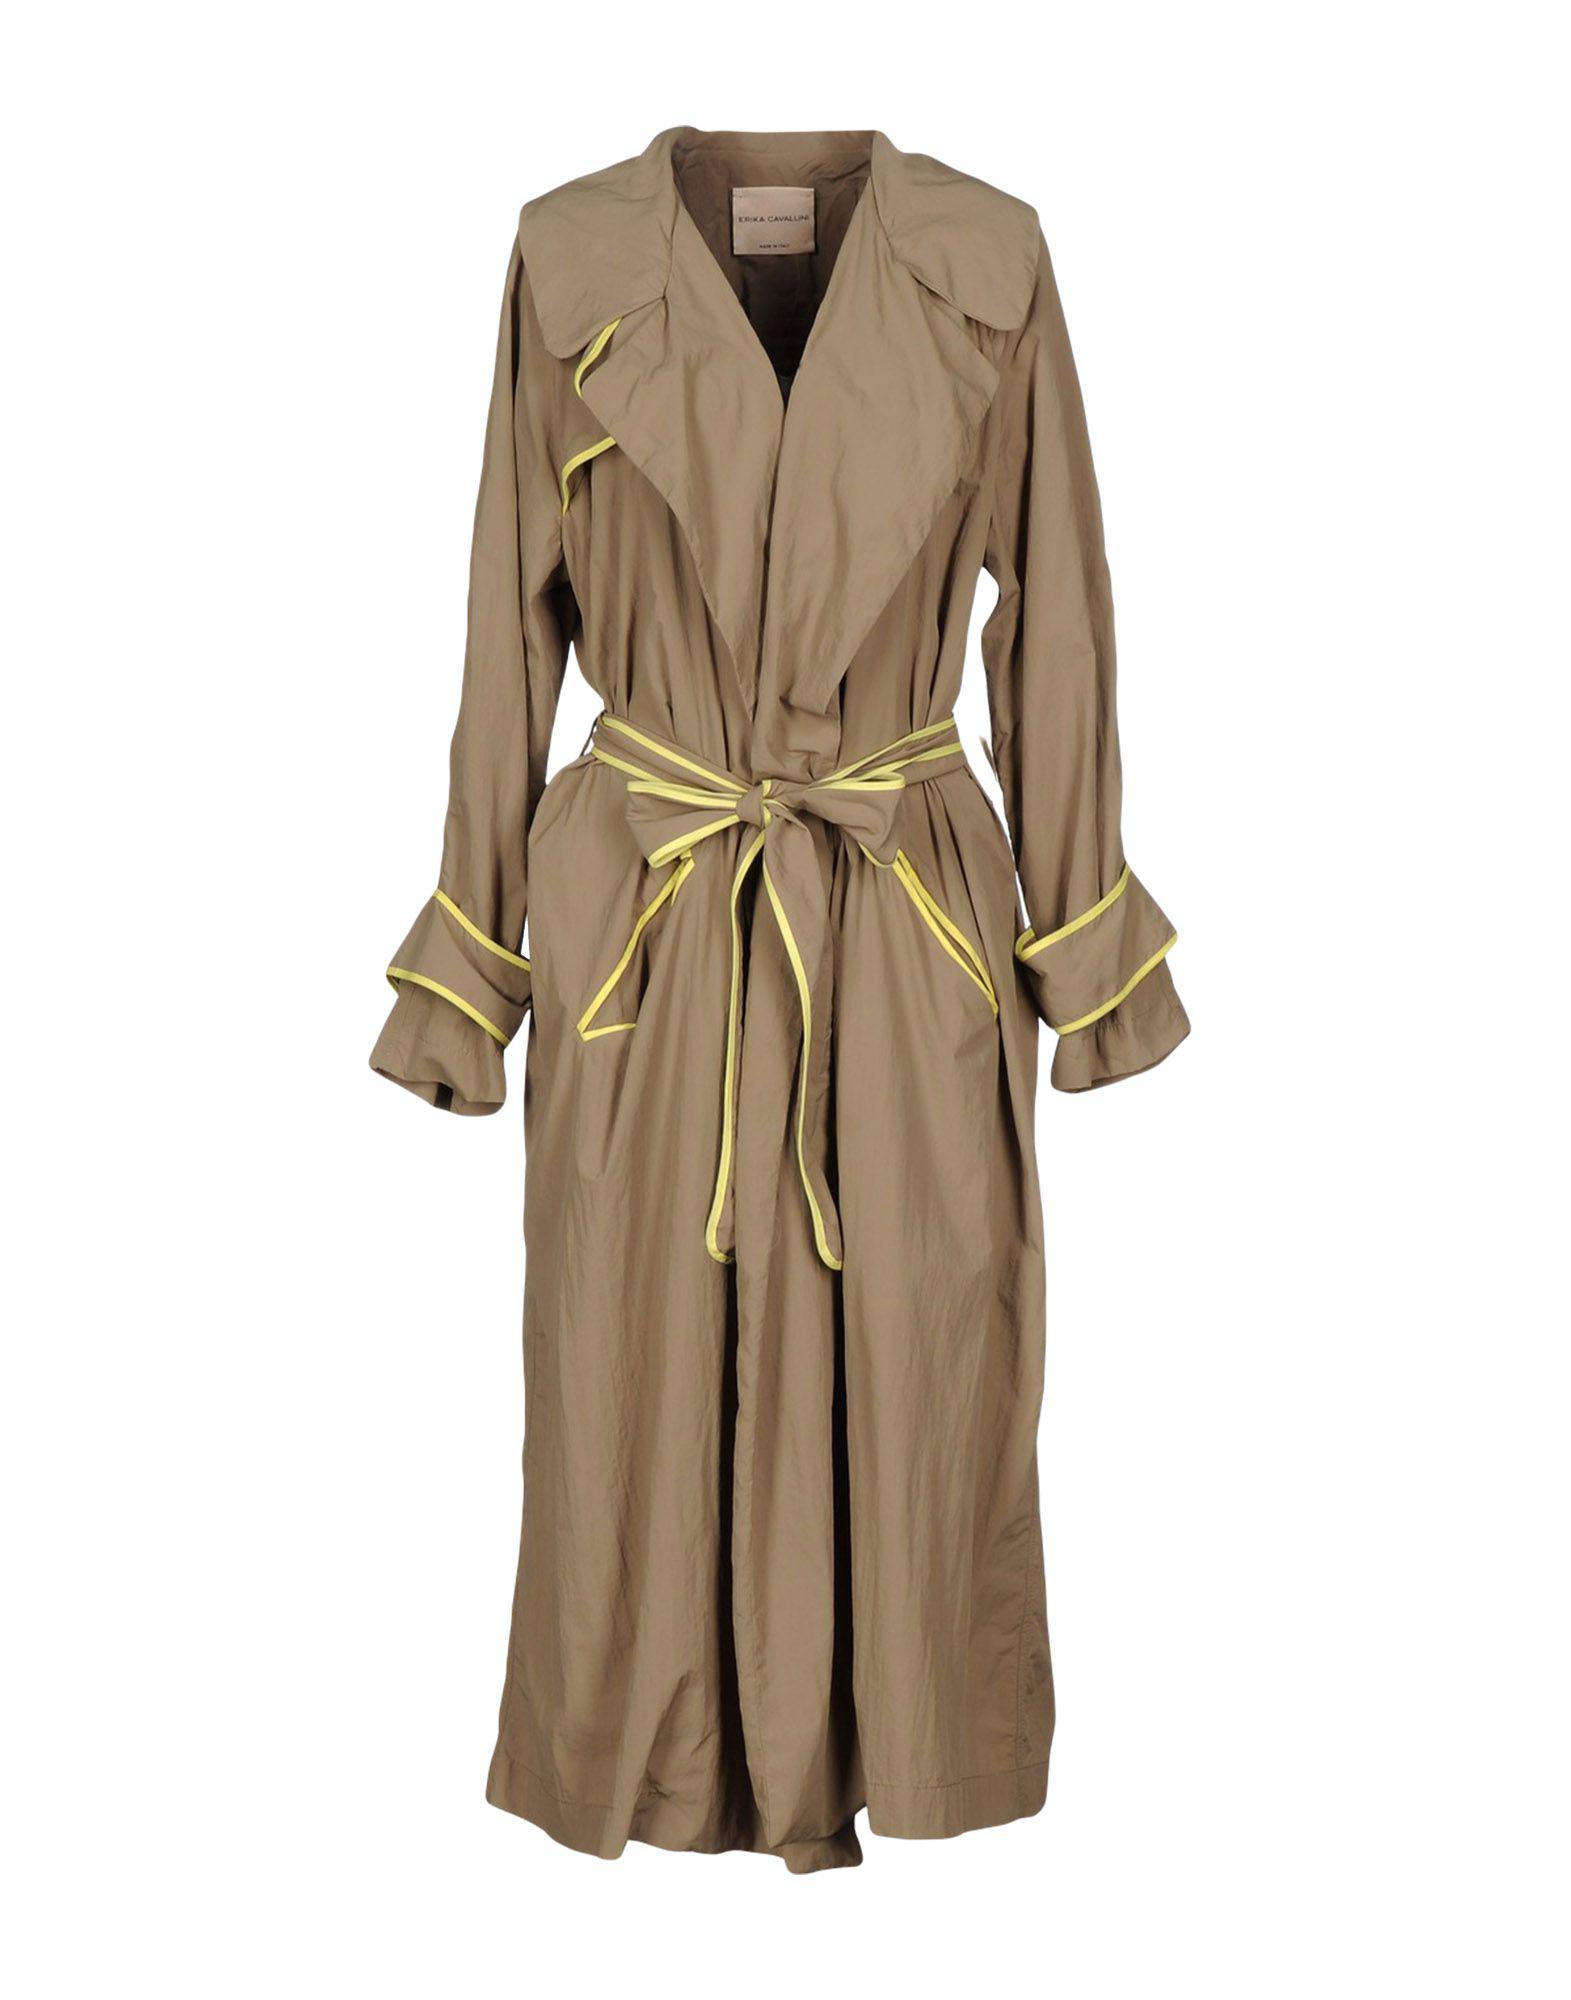 Erika Cavallini Semi Couture Synthetic Overcoat in Sand (Natural) - Lyst